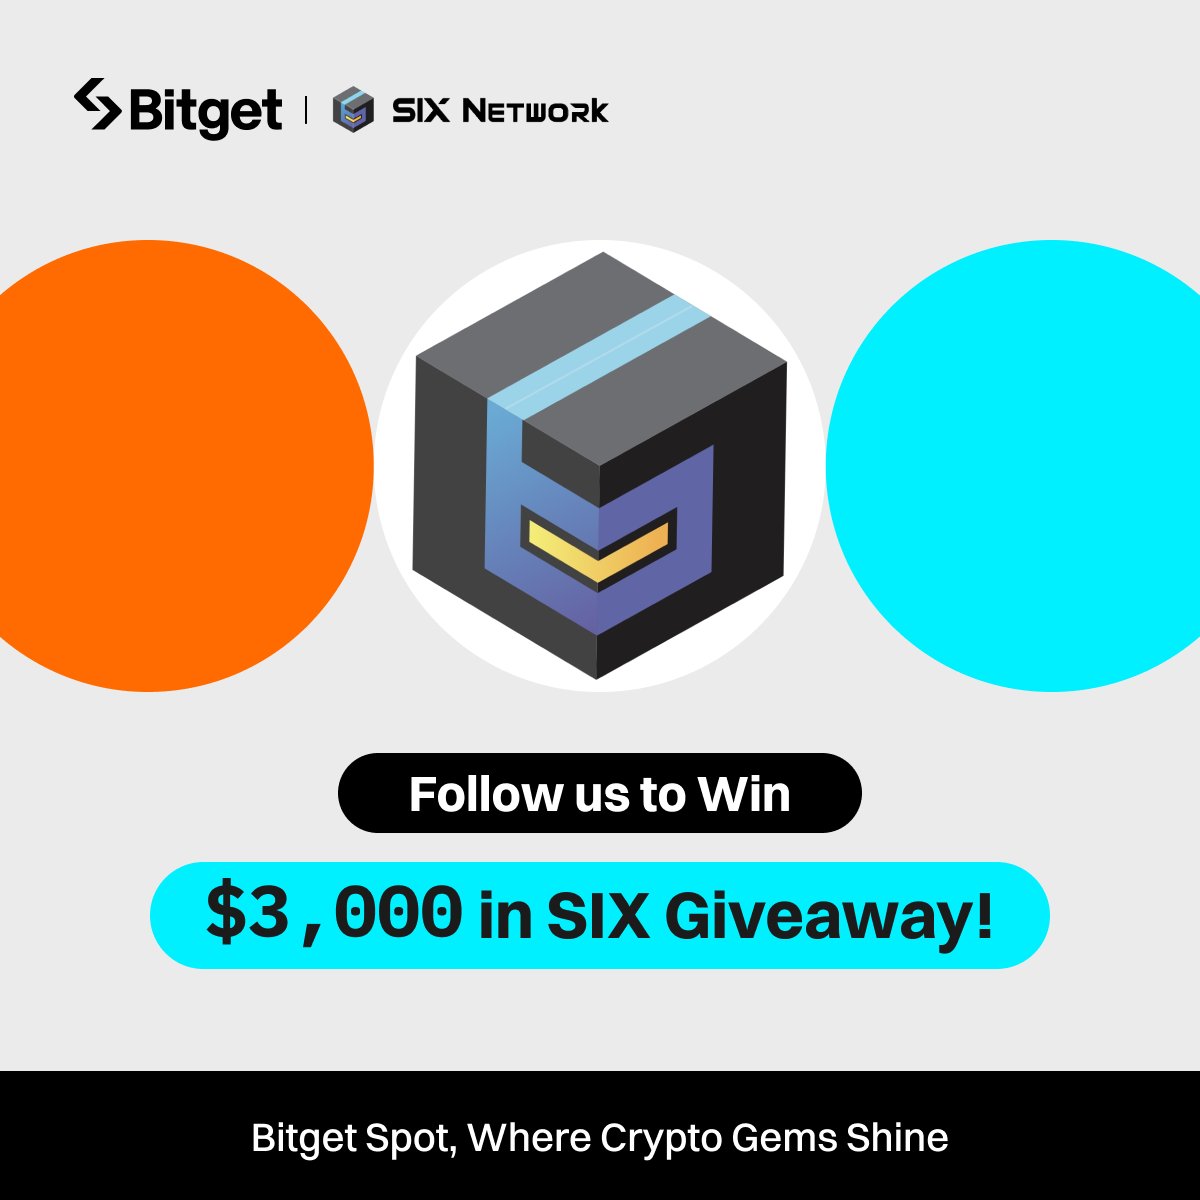 $3,000 GIVEAWAY We're giving away $3,000 worth of $SIX to celebrate its listing on #BitgetSpot! 1⃣ Follow @bitgetglobal @theSIXnetwork 2⃣ Repost with #SIXIlistBitget & tag your friends 3⃣ Fill out: forms.gle/hrCWYVQrc1BoBG… 🎁 60 winners * $50 worth of SIX